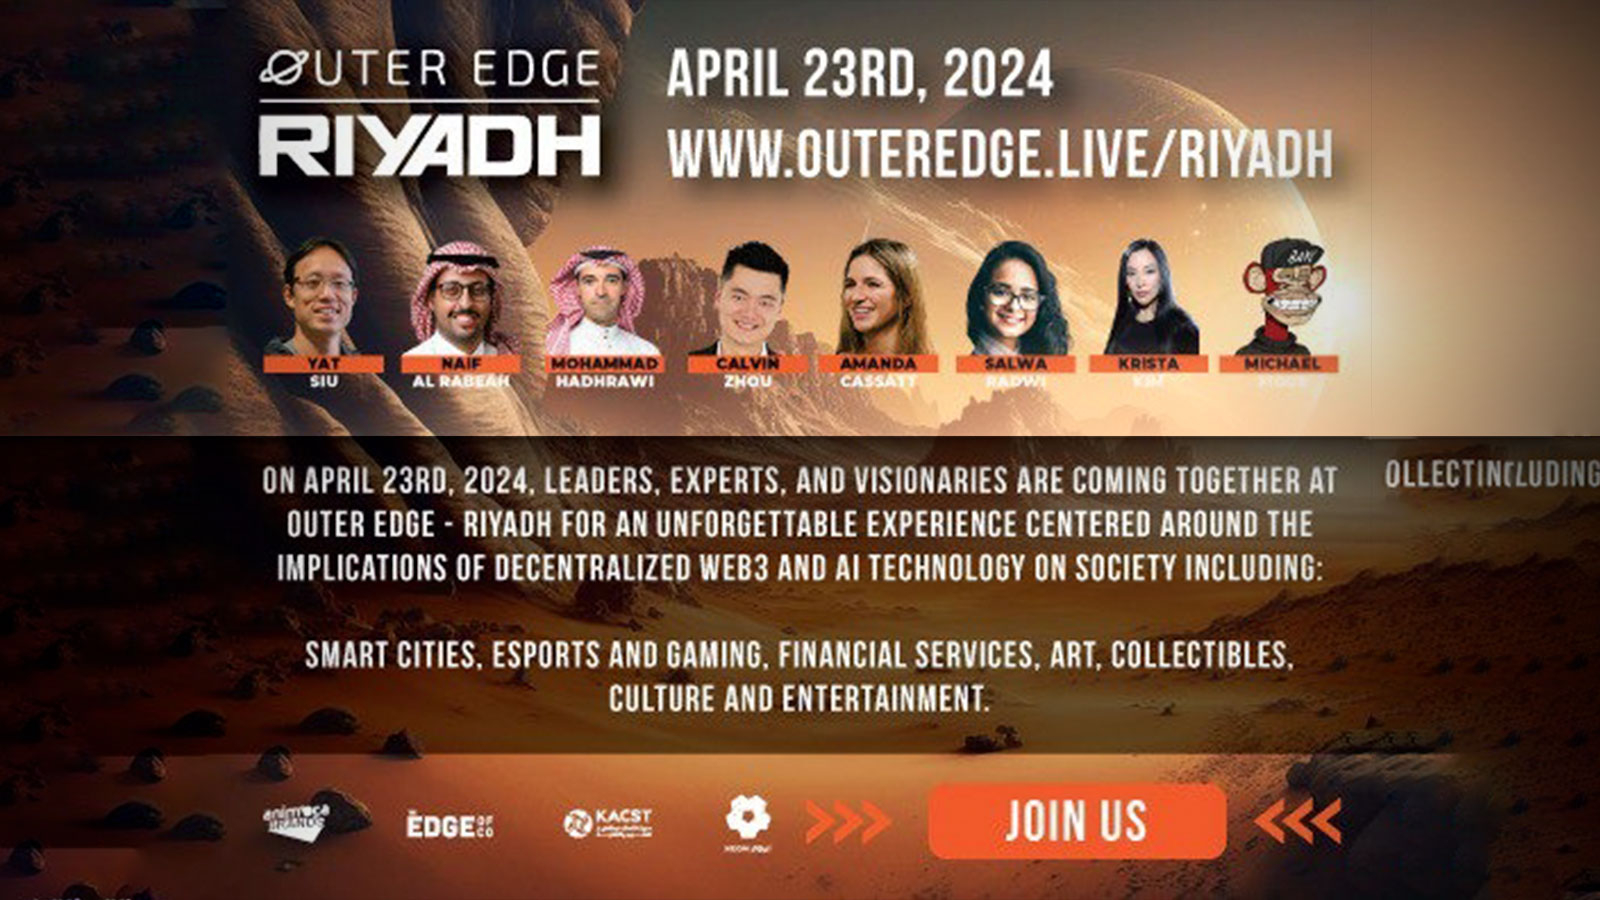 From LA to Riyad, Outer Edge Innovation Summit debuts in Saudi Arabia in Partnership with Animoca Brands and KACST